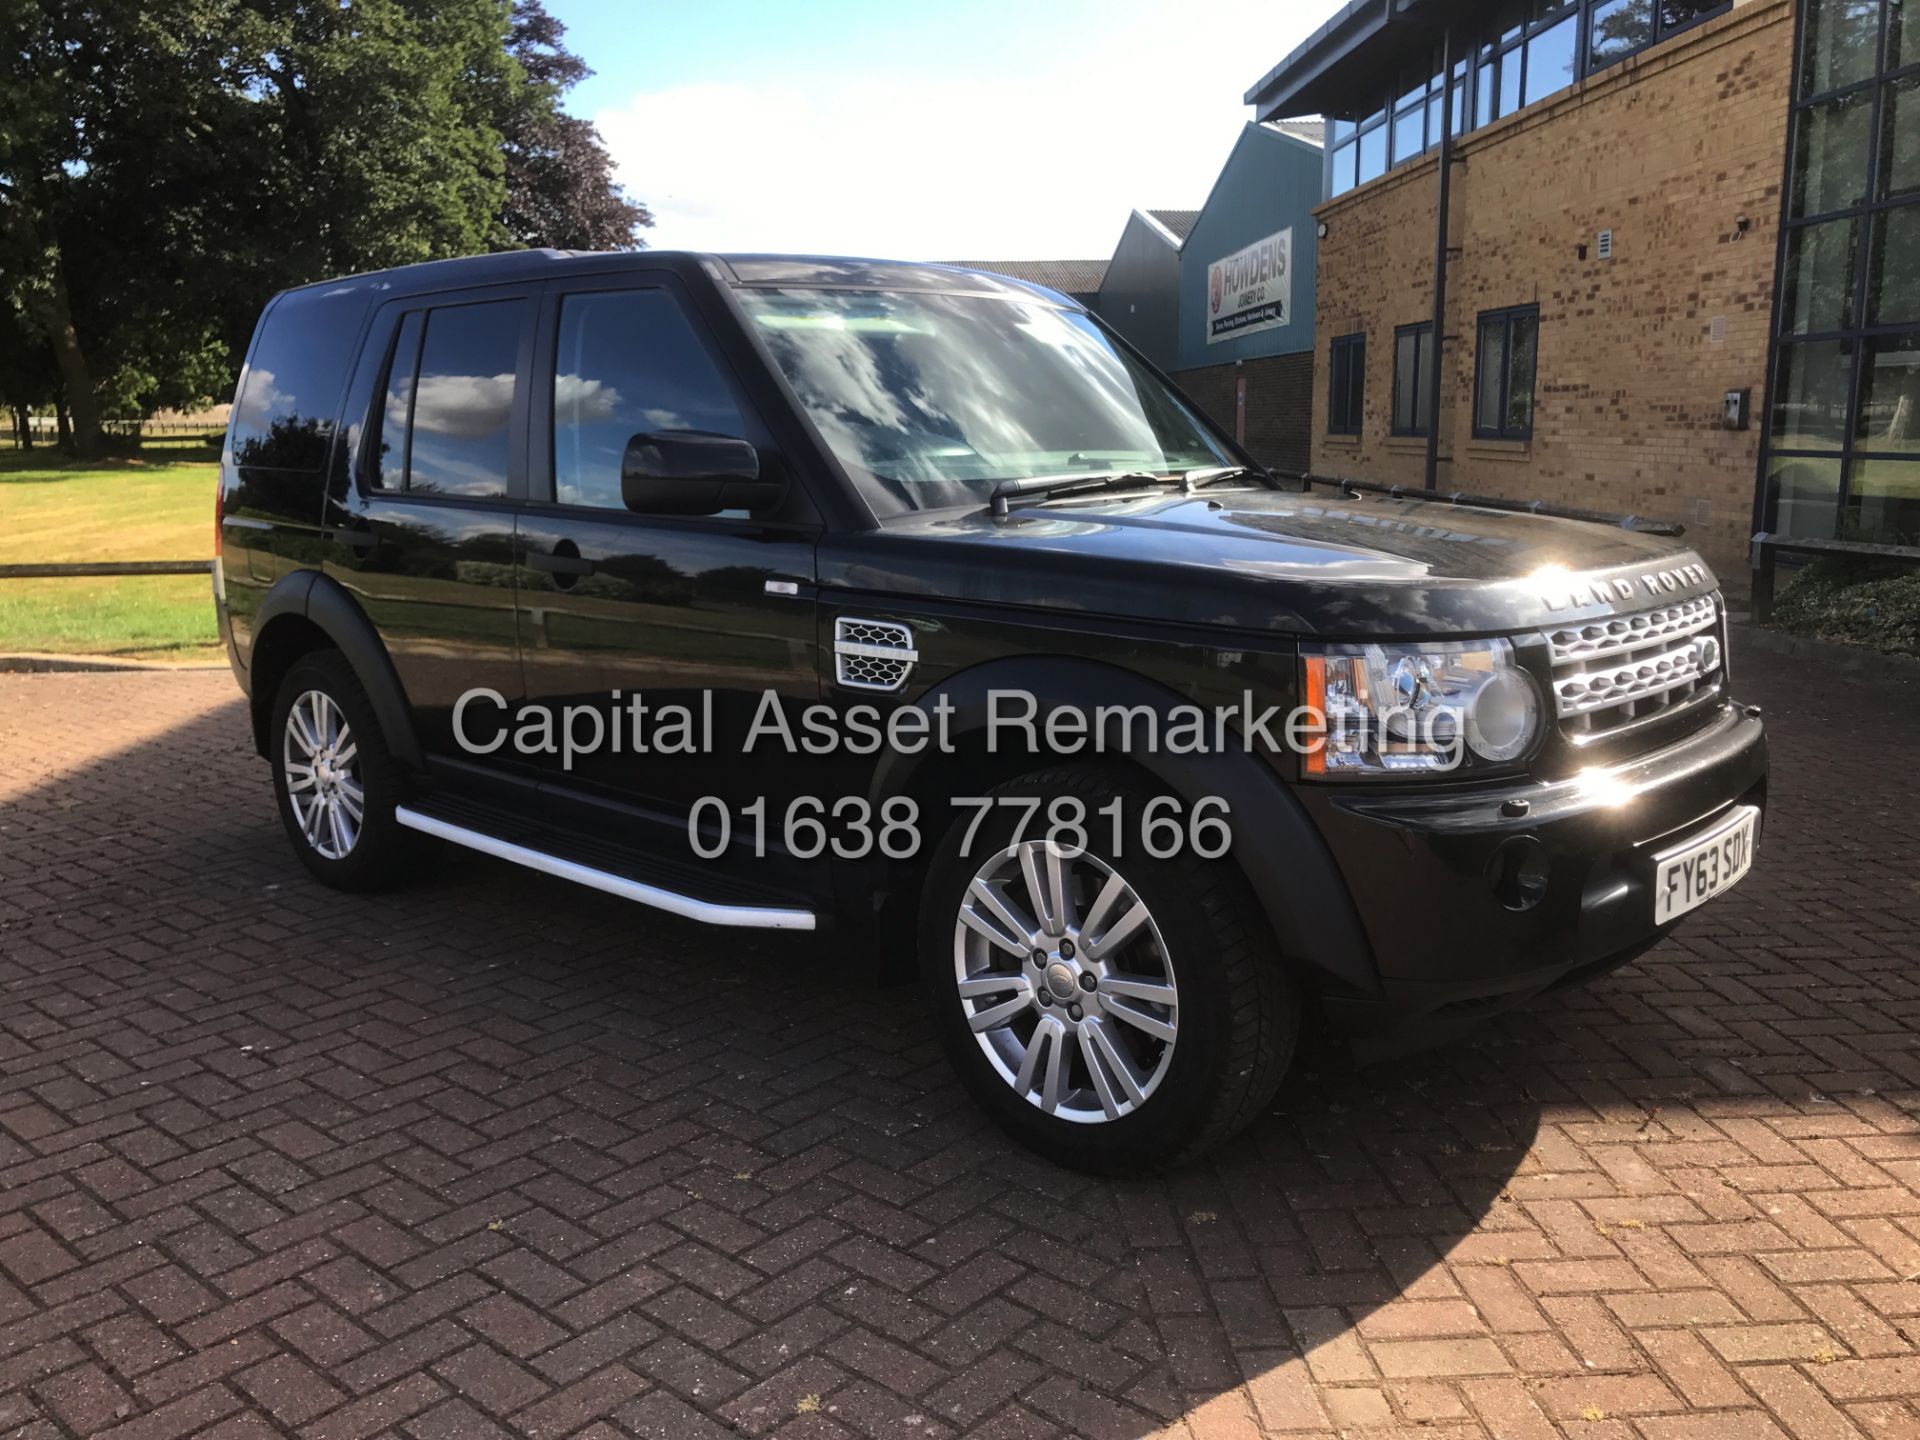 ON SALE LAND ROVER DISCOVERY 4 "3.0SDV6 - AUTO"COMMERCIAL (2014 MODEL) HUGE SPEC - SAT NAV -LEATHER - Image 2 of 31